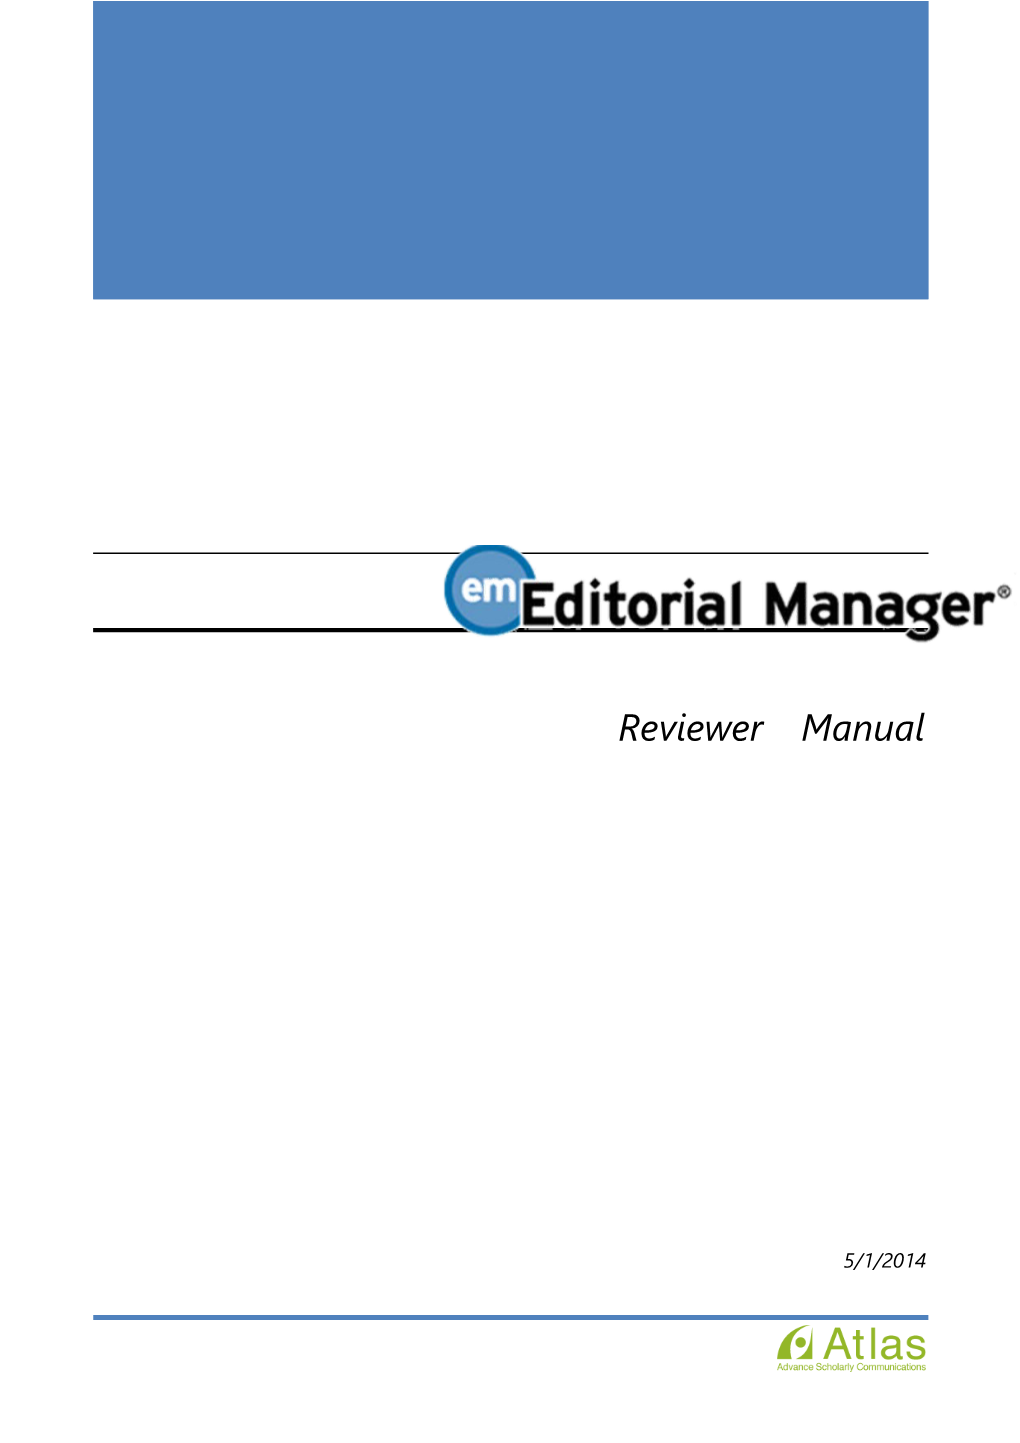 1Registering with Editorial Manager